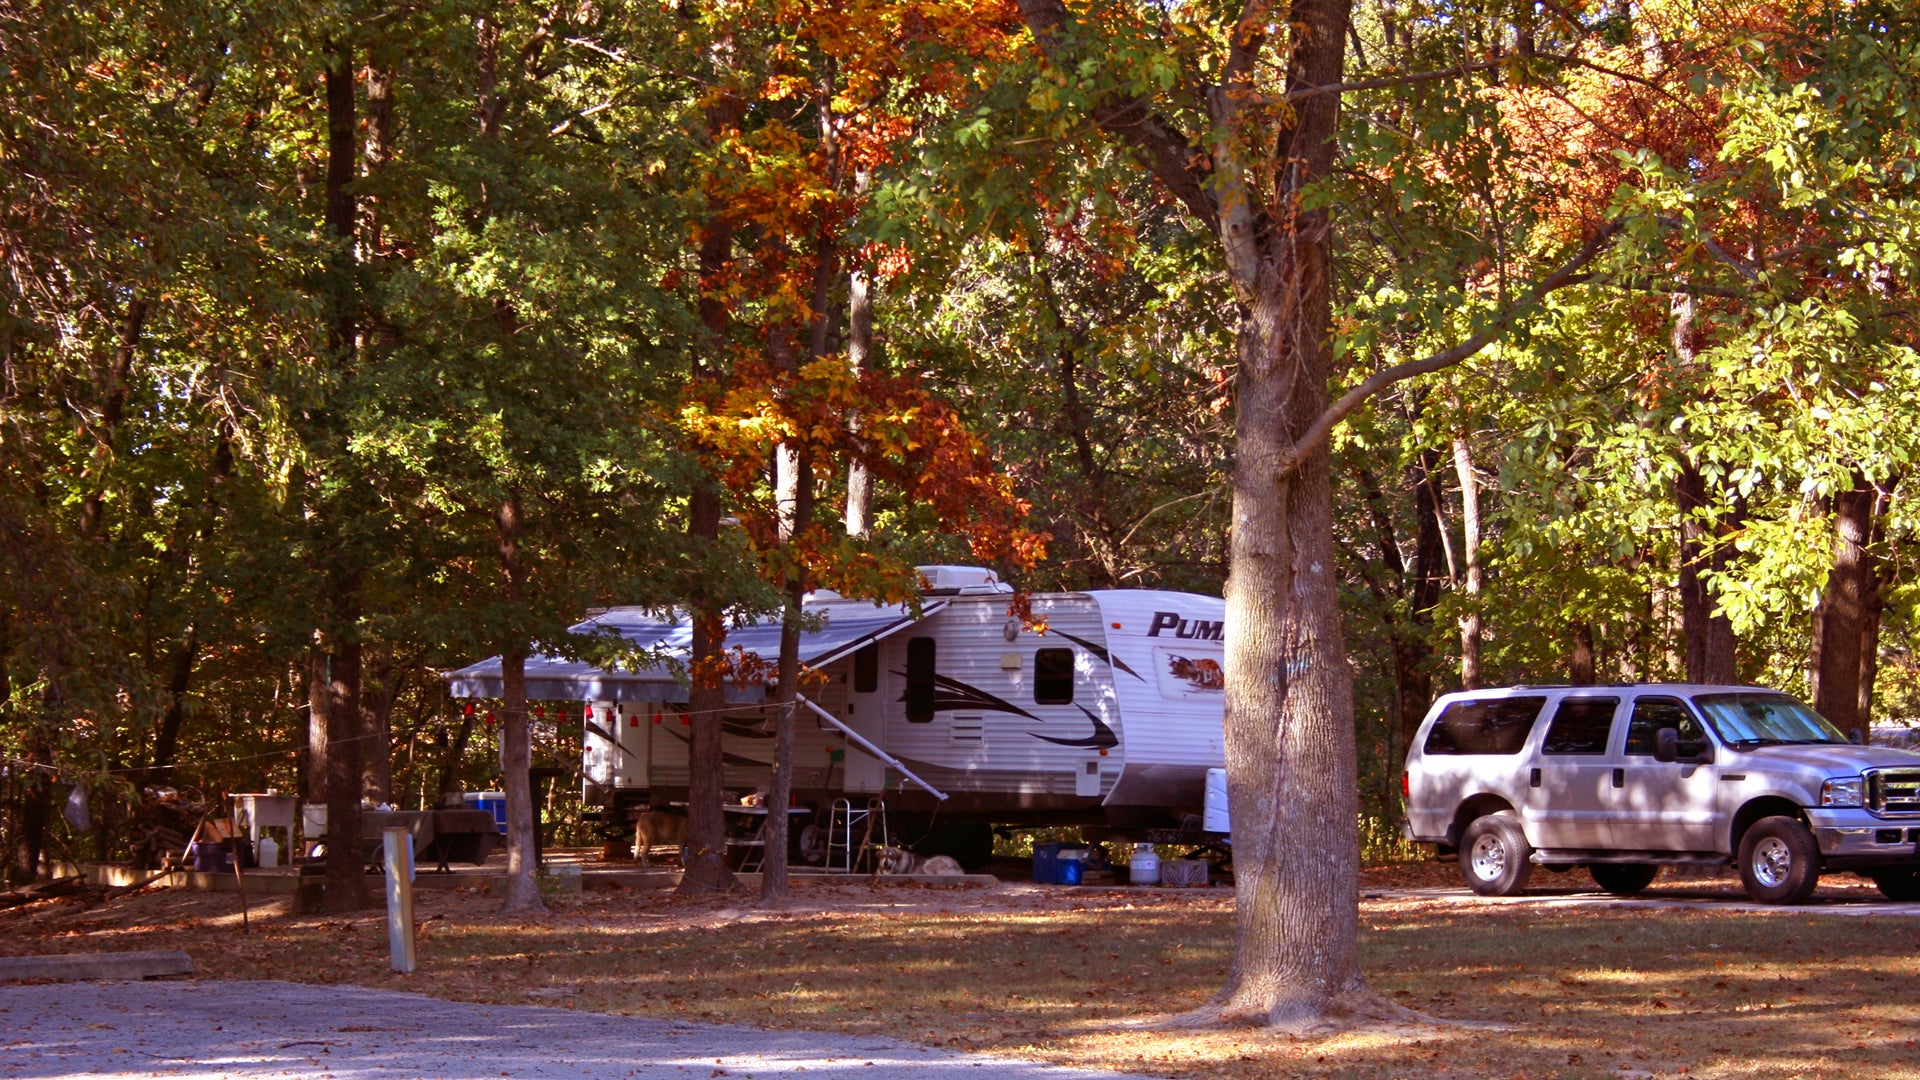 A standard backin site at Lone point campground, most times you can camp without neighbors on both sides.